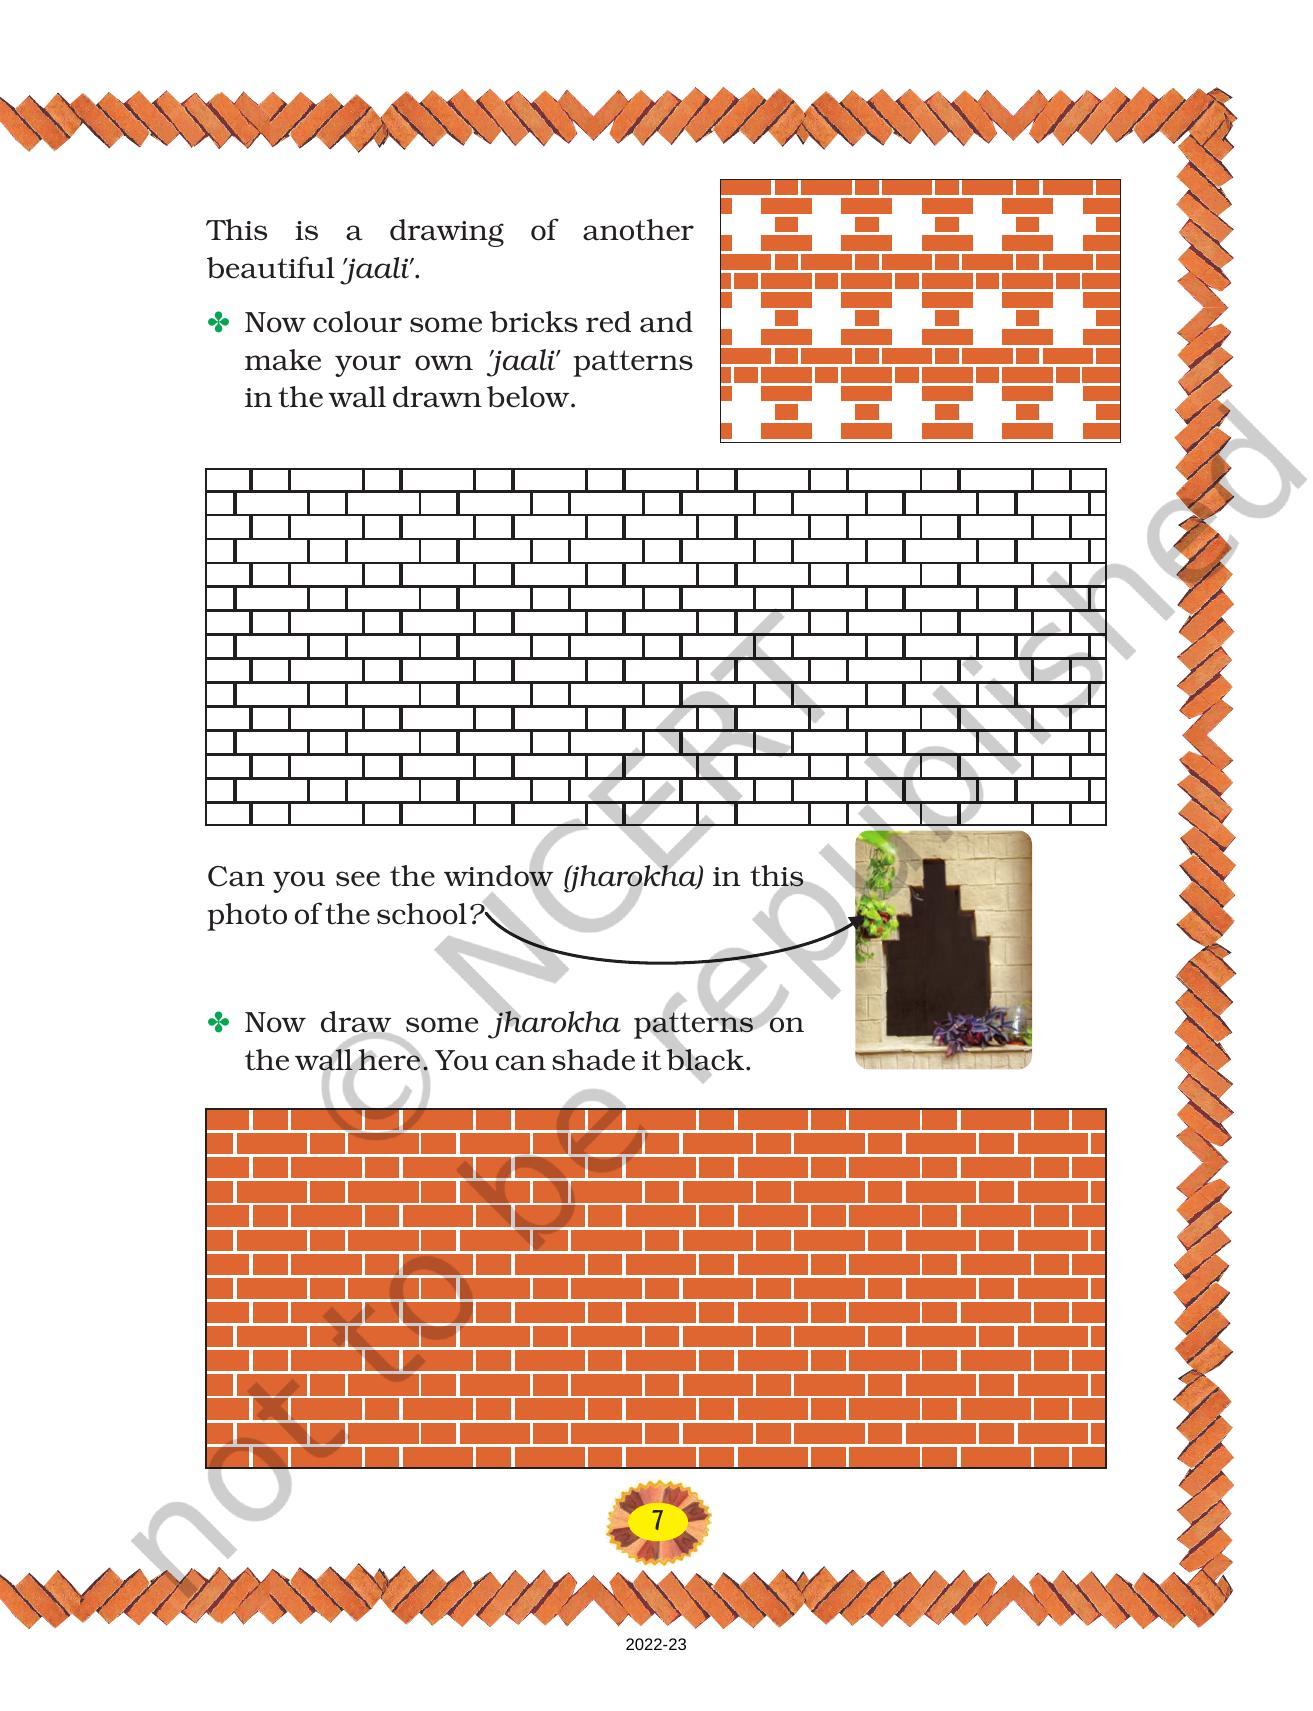 NCERT Book for Class 4 Maths Chapter 1 Building with Bricks - Page 7